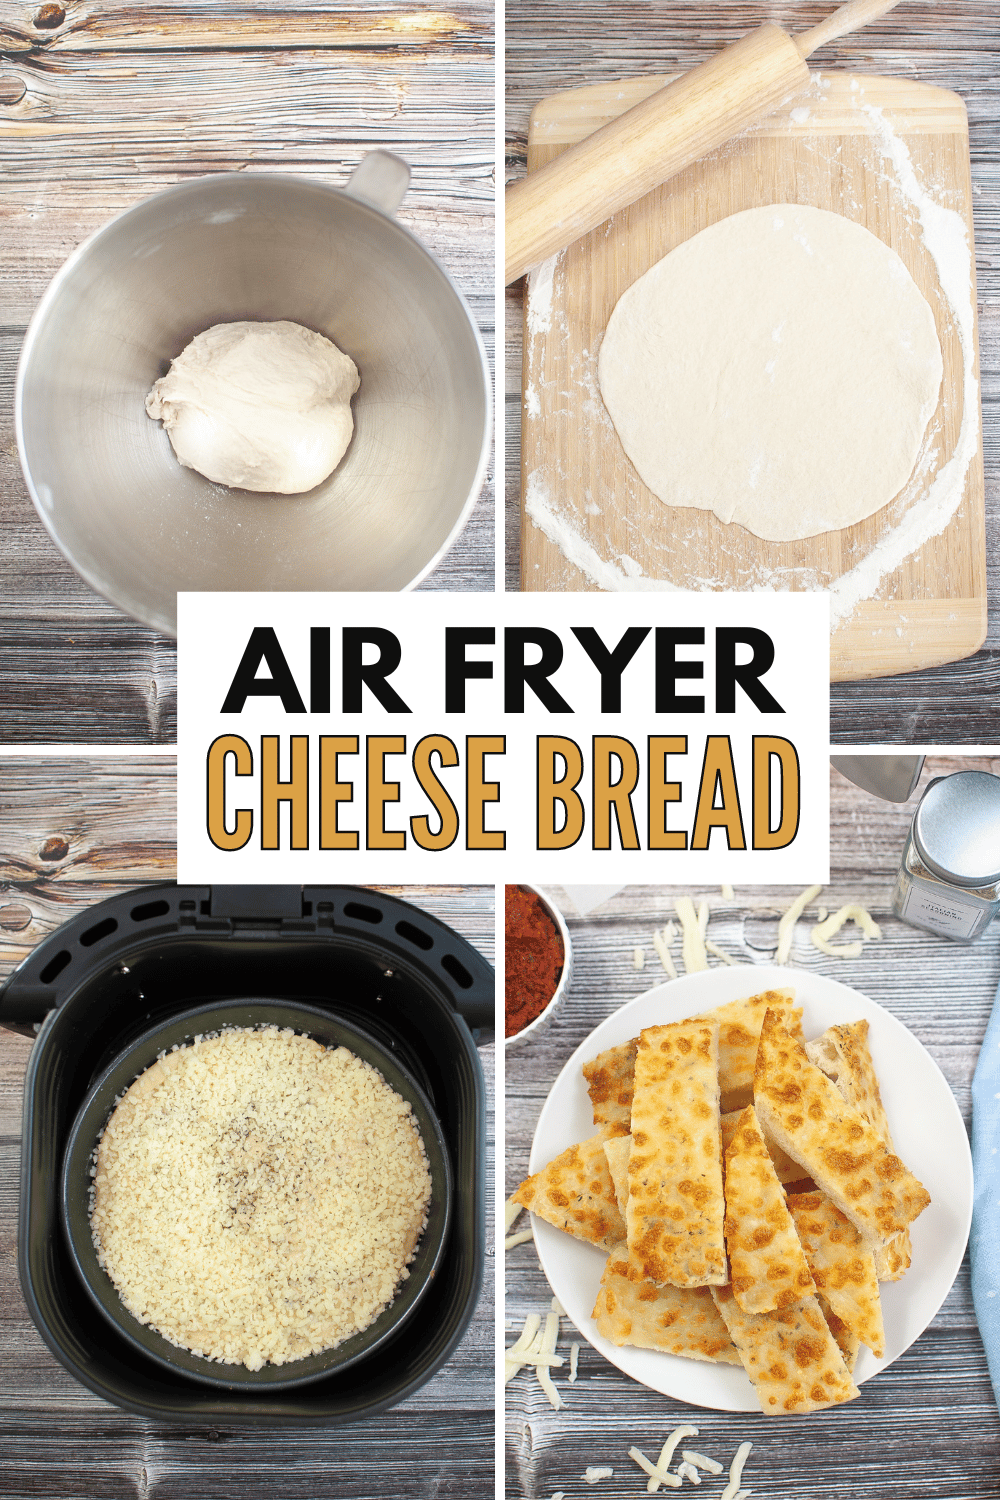 This Air Fryer Cheese Bread is delicious and easy to make. It’s perfect for an easy snack or appetizer. It’s cheesy, buttery, and delicious! #airfryercheesebread #airfryer #cheesebread #breadsticks #cheesygarlicbread via @wondermomwannab